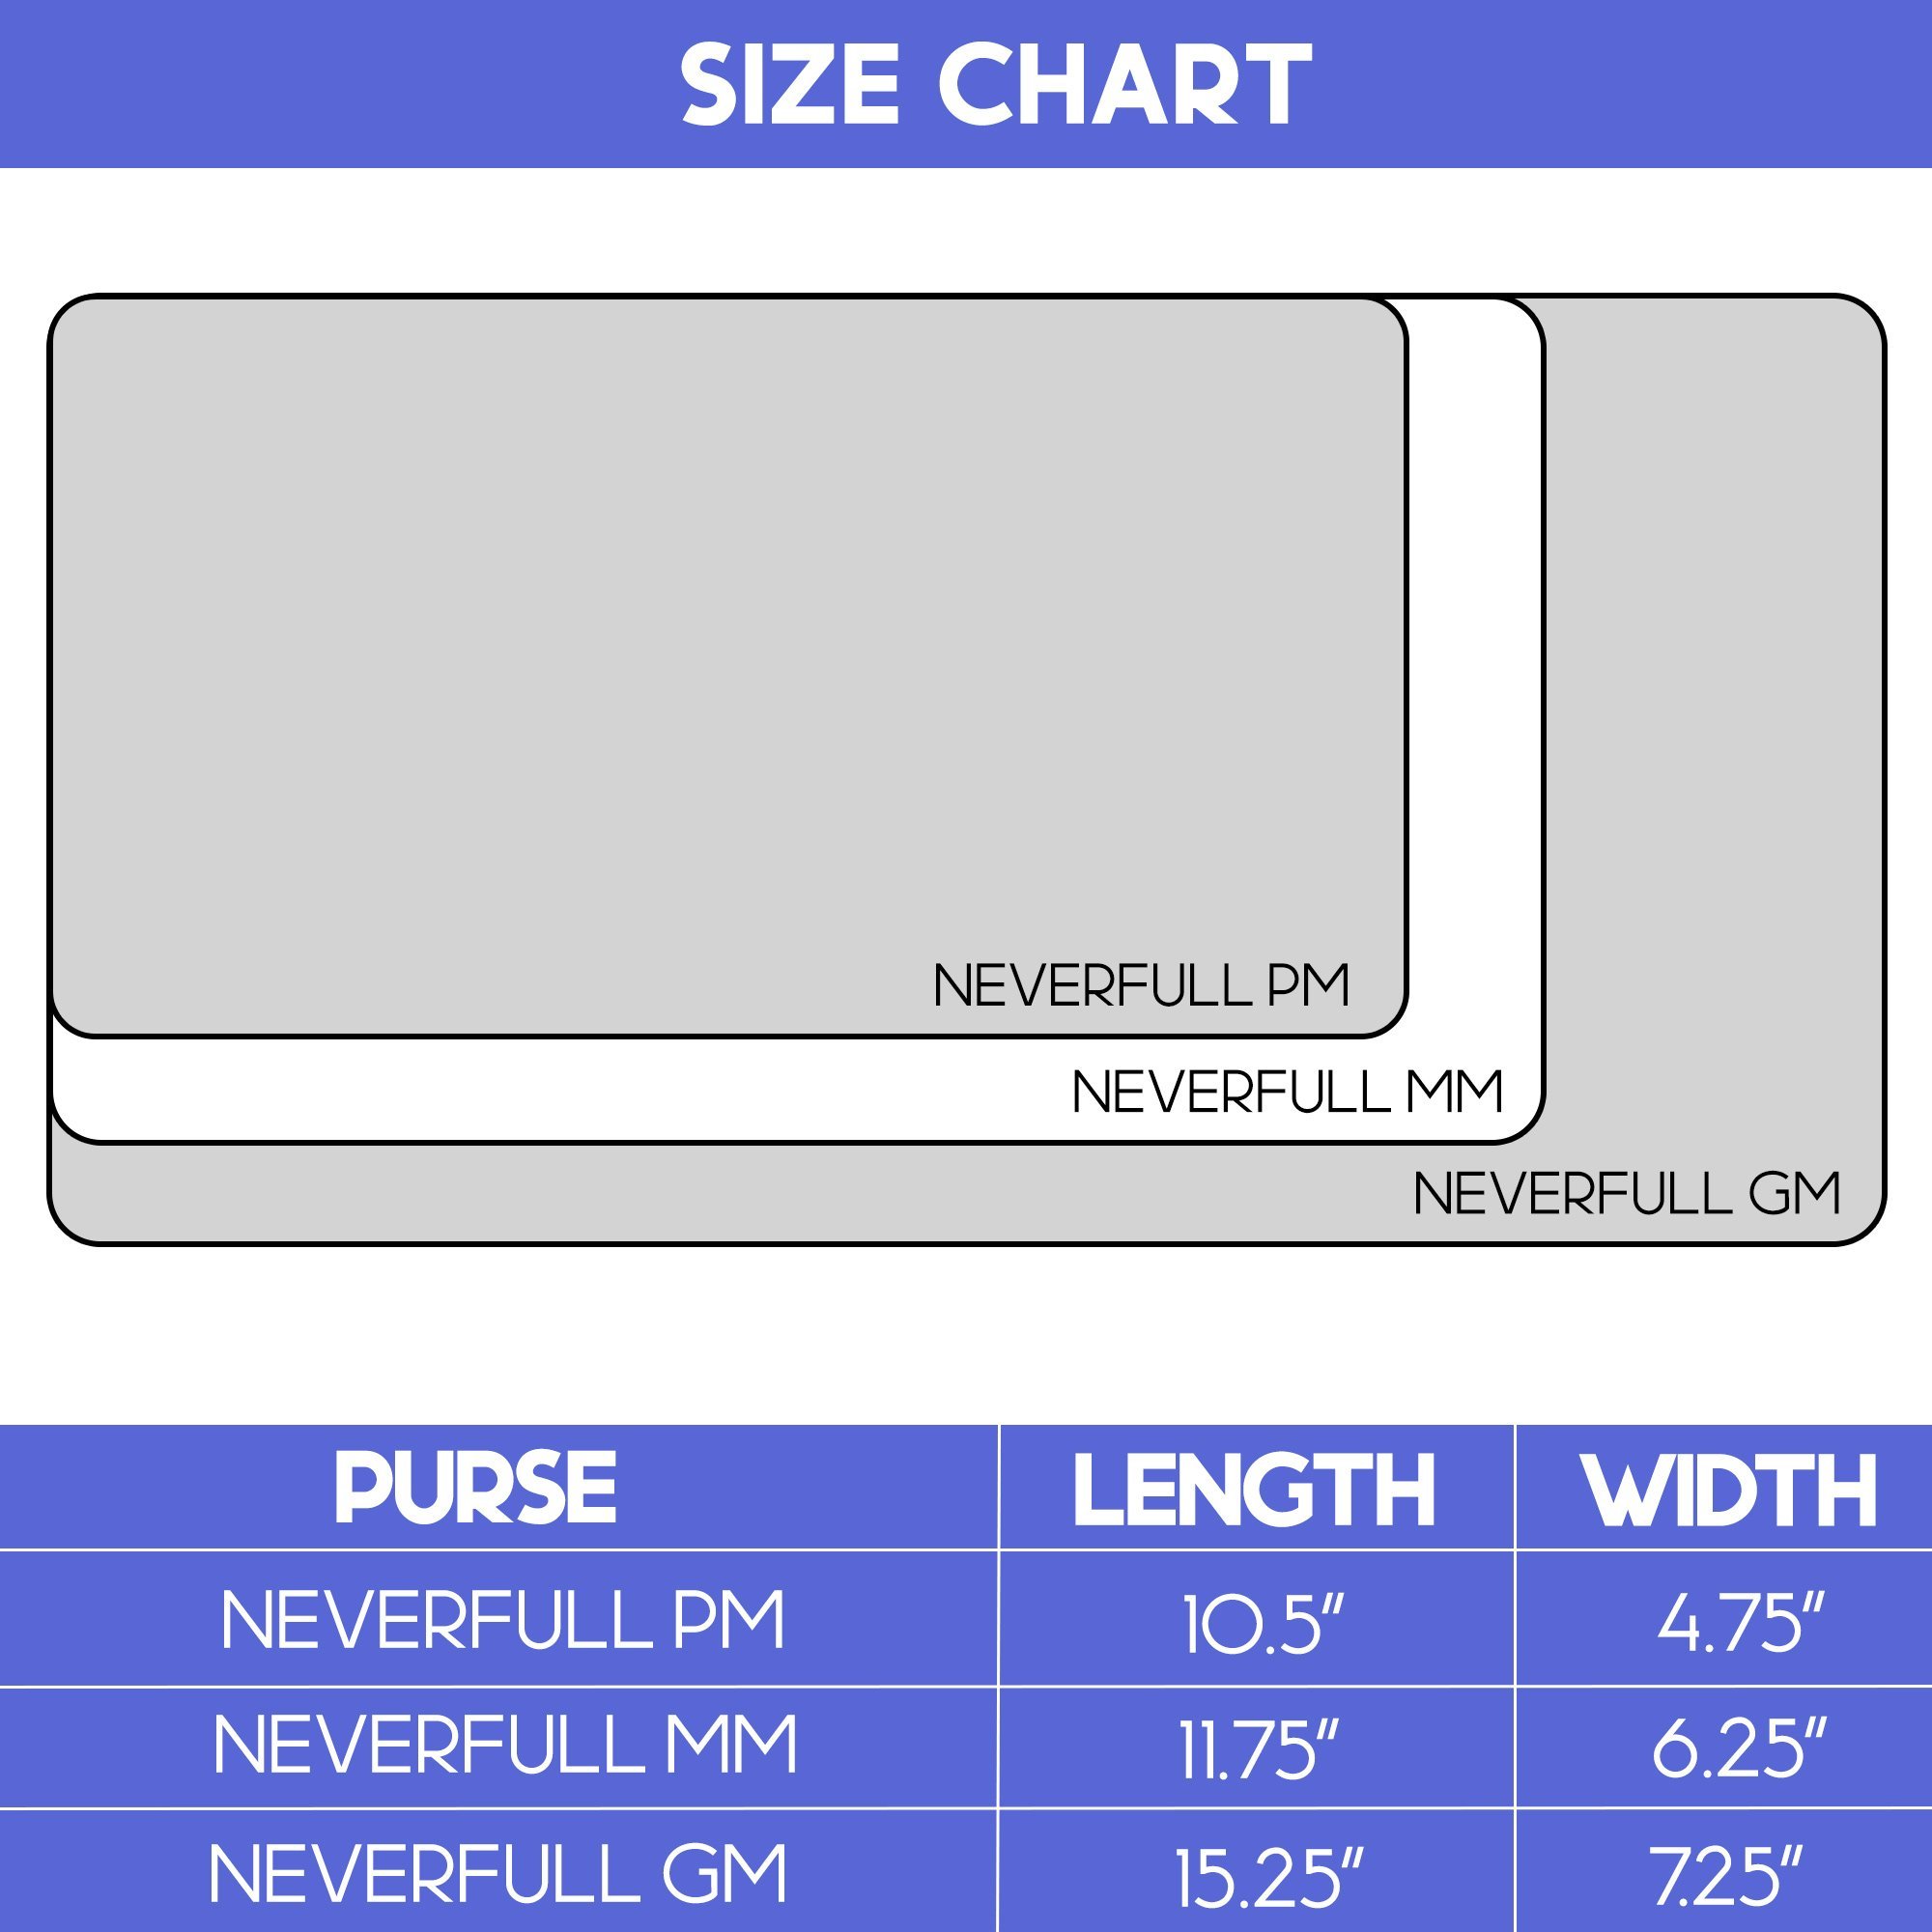 Neverfull PM, MM, GM - sizing on arm.